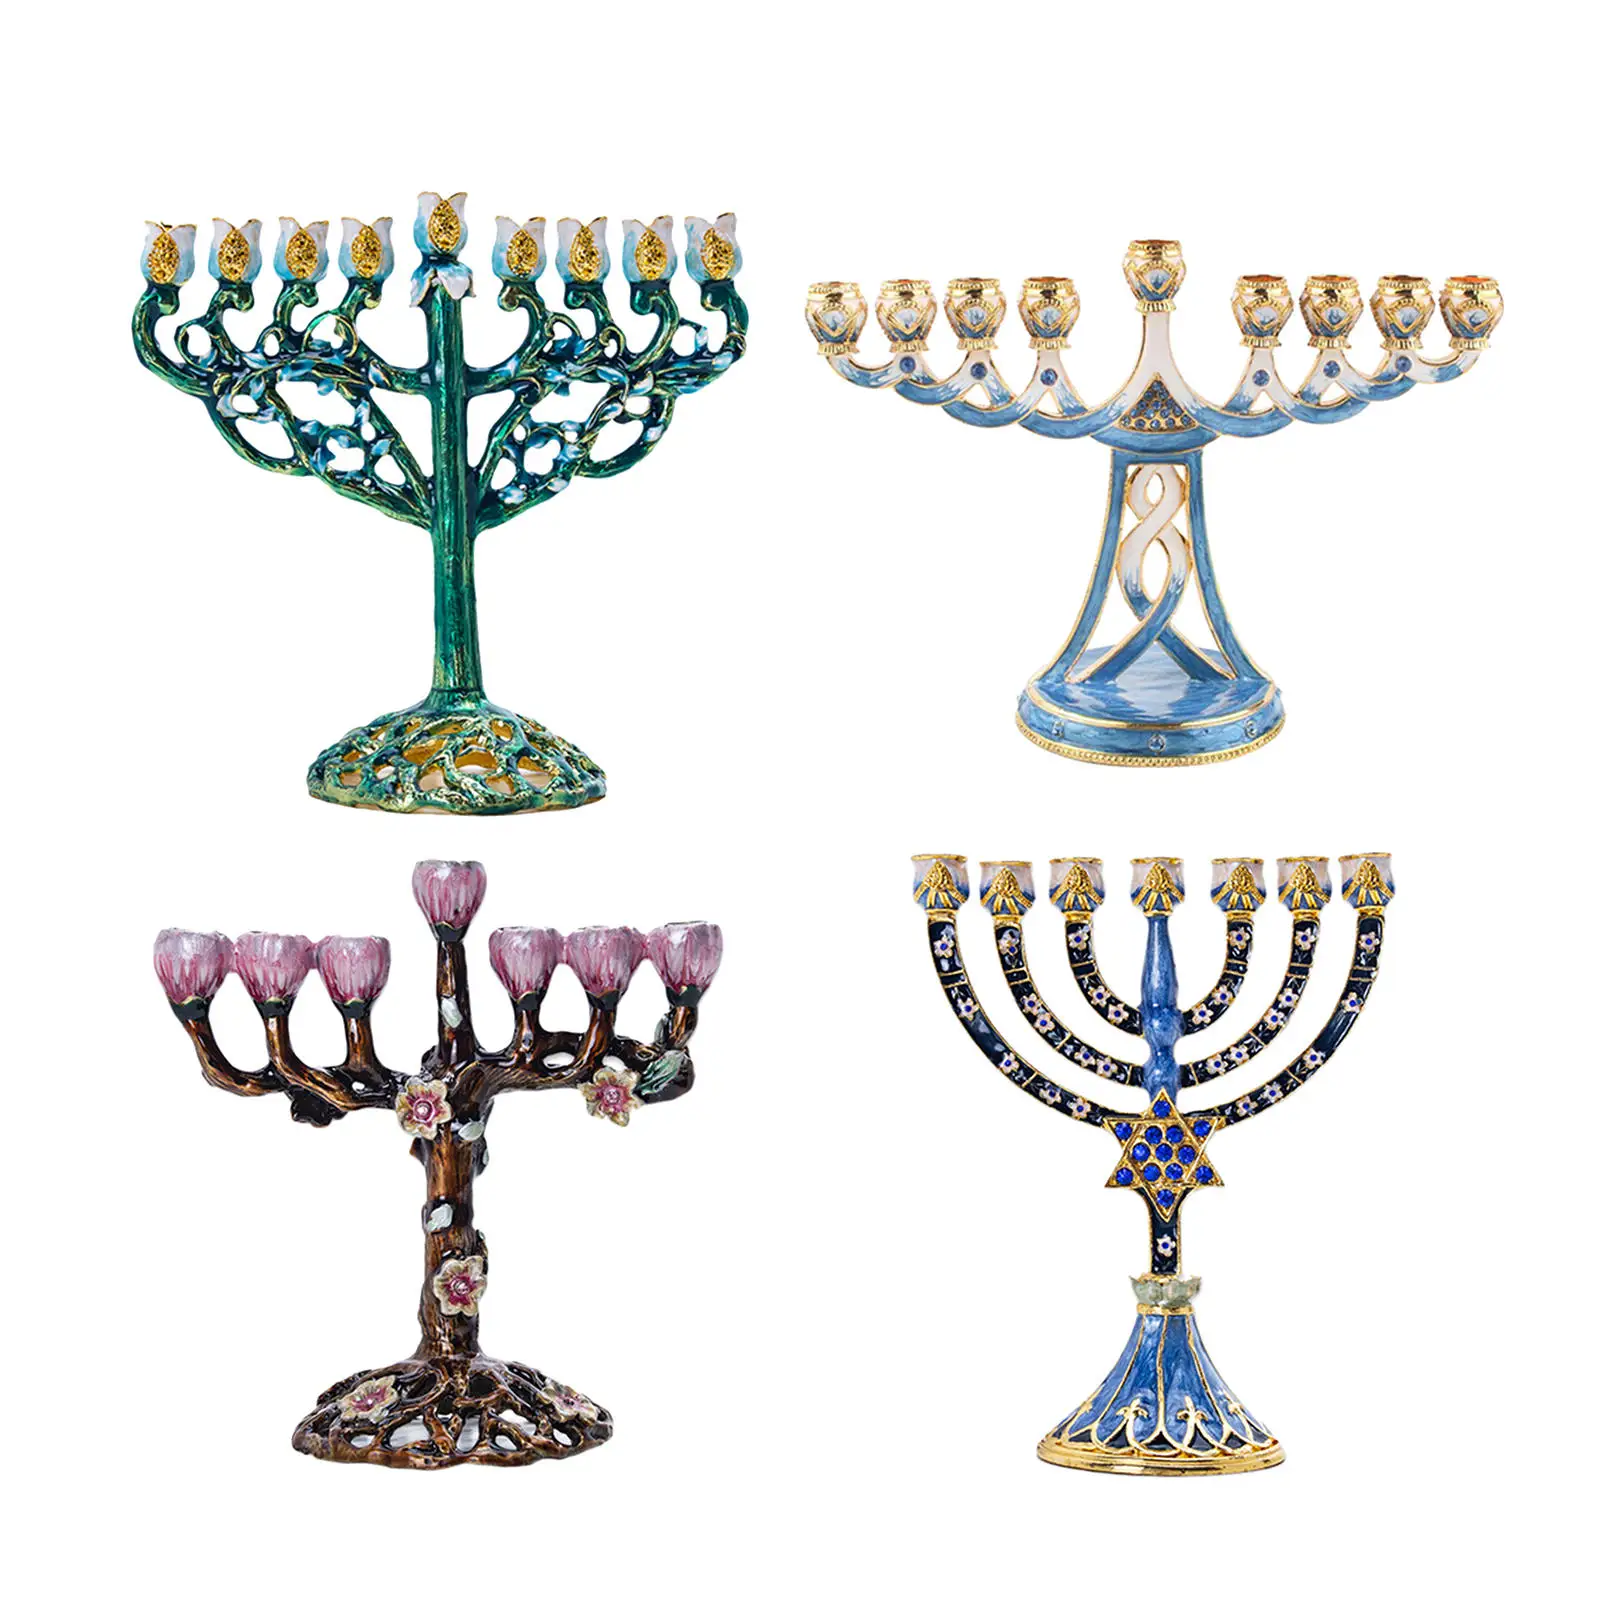 Hand Painted Hanukkah Enamel Menorah with Jeweled Accents Bejeweled Candelabra Candle Holder